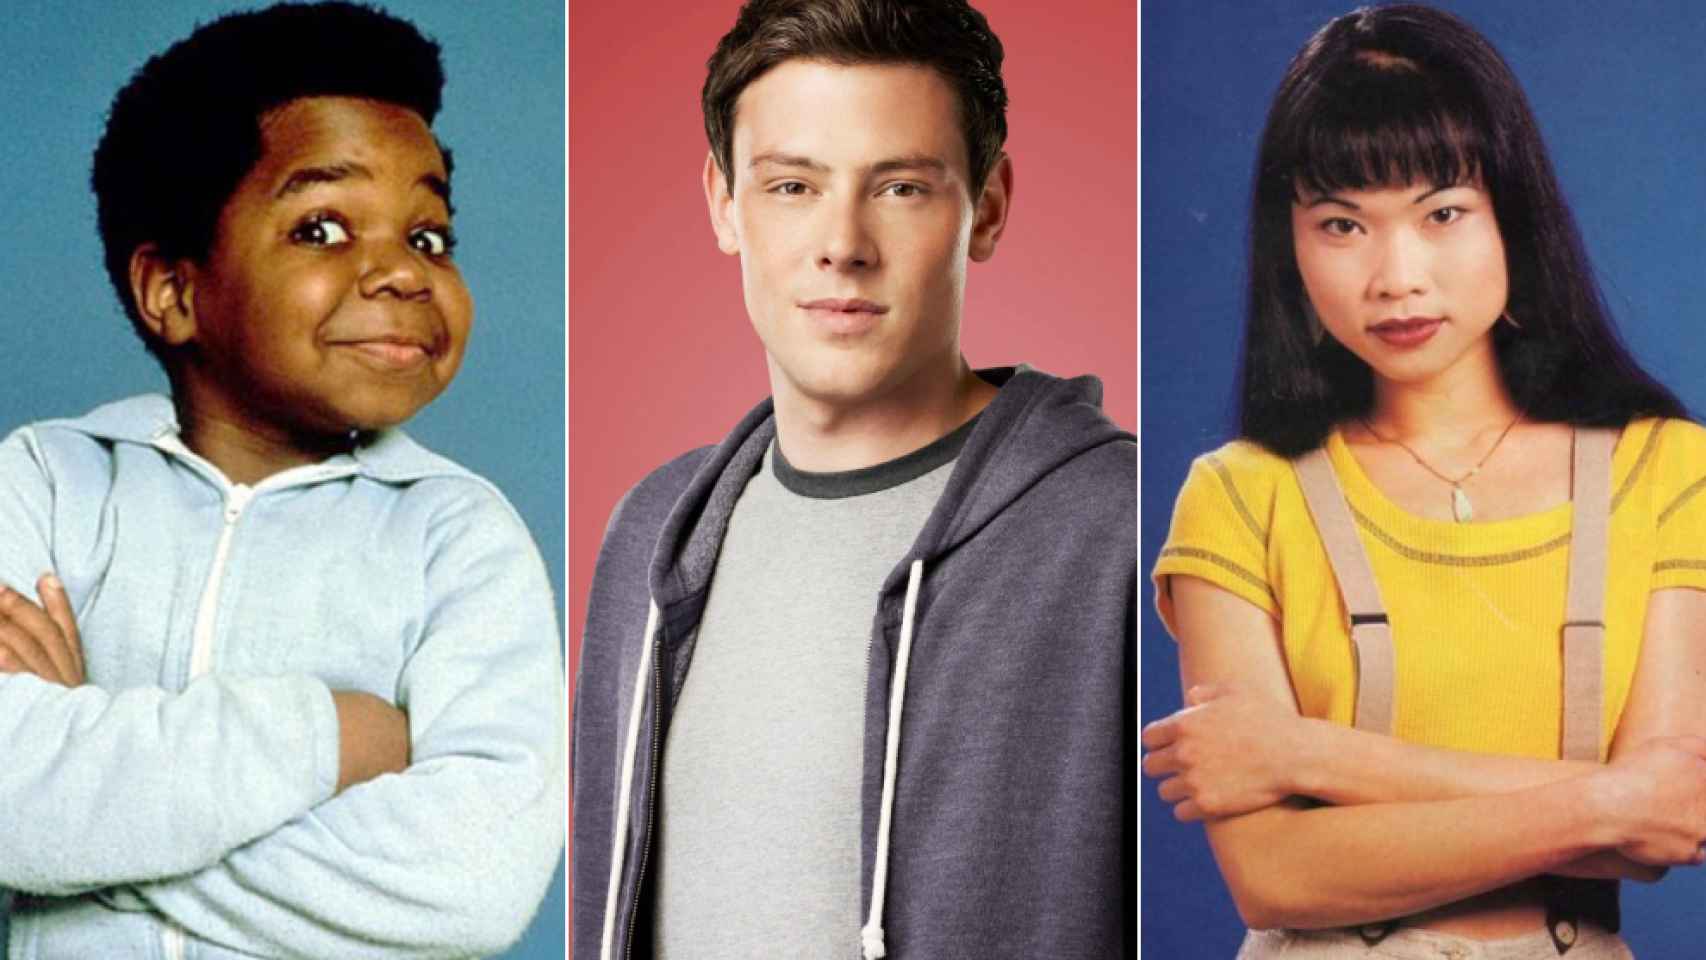 Gary Coleman, Cory Monteith y Thuy Trang